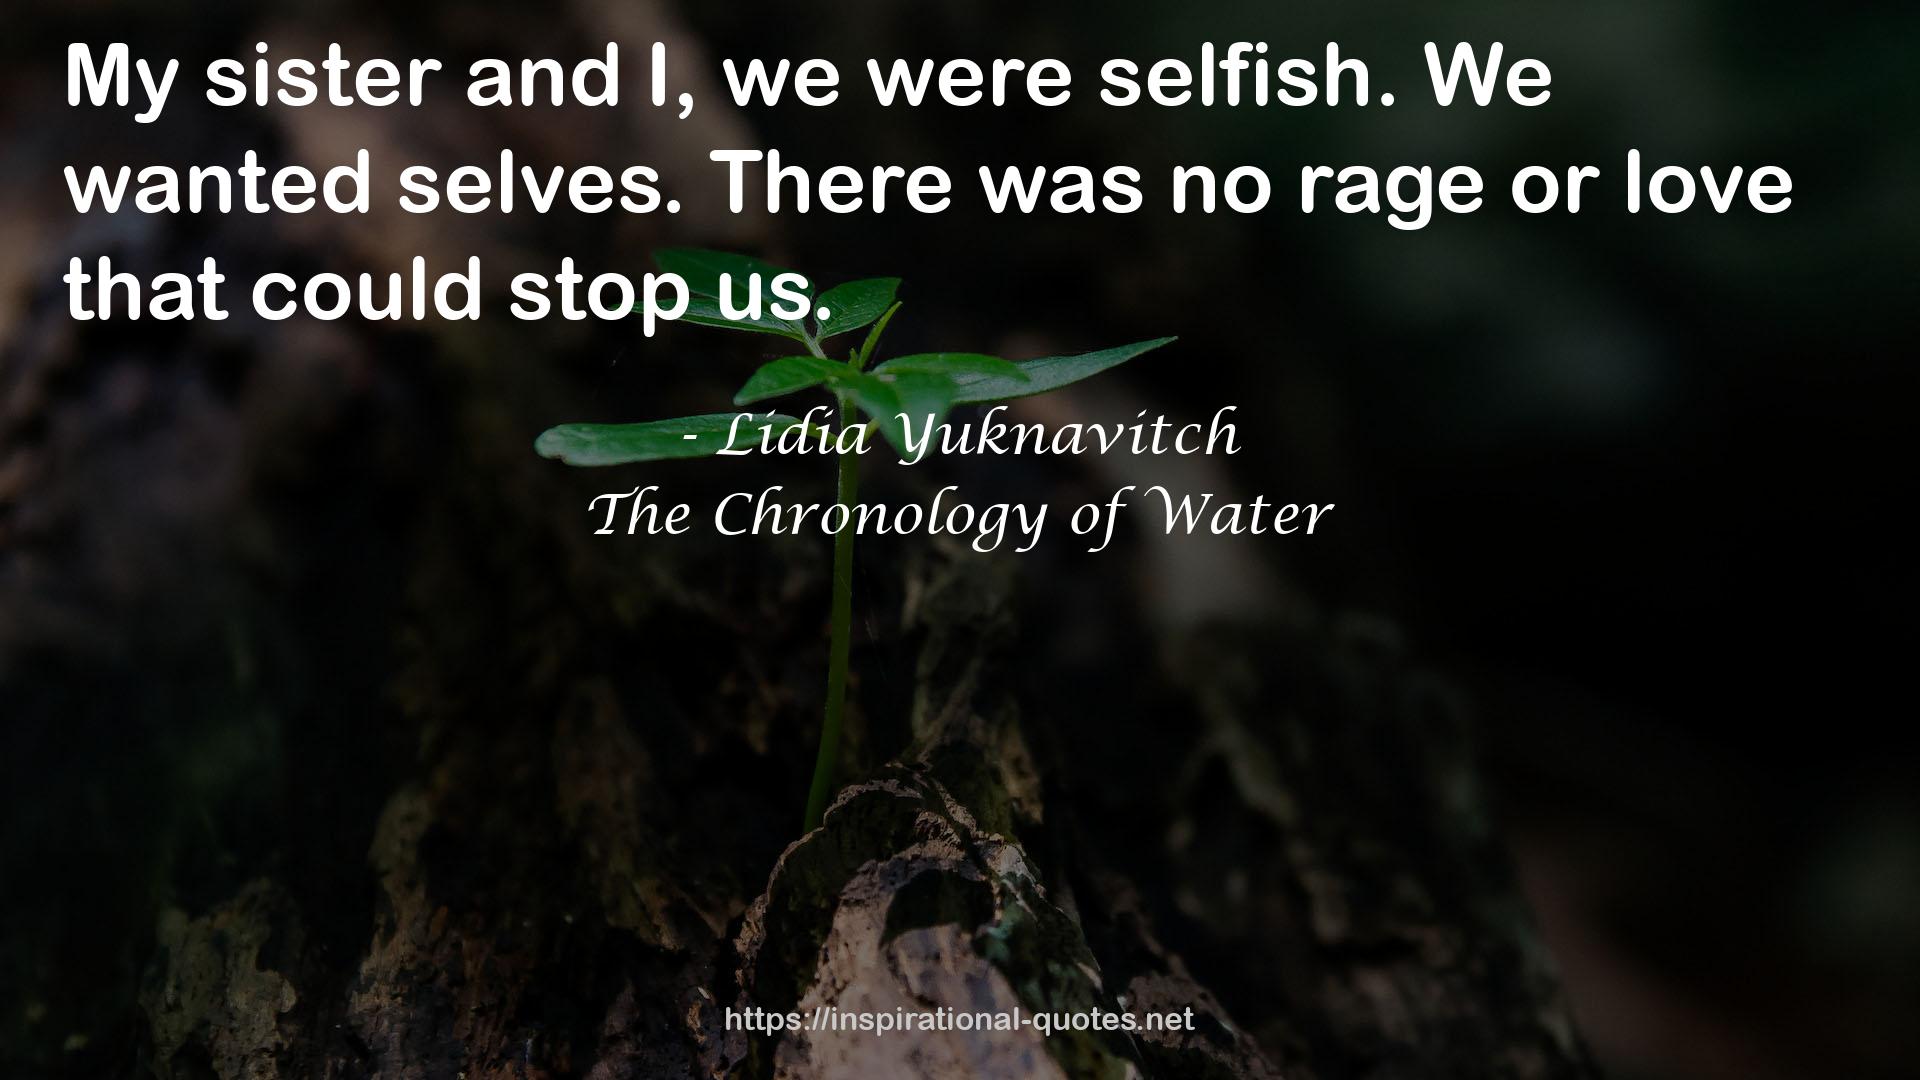 The Chronology of Water QUOTES